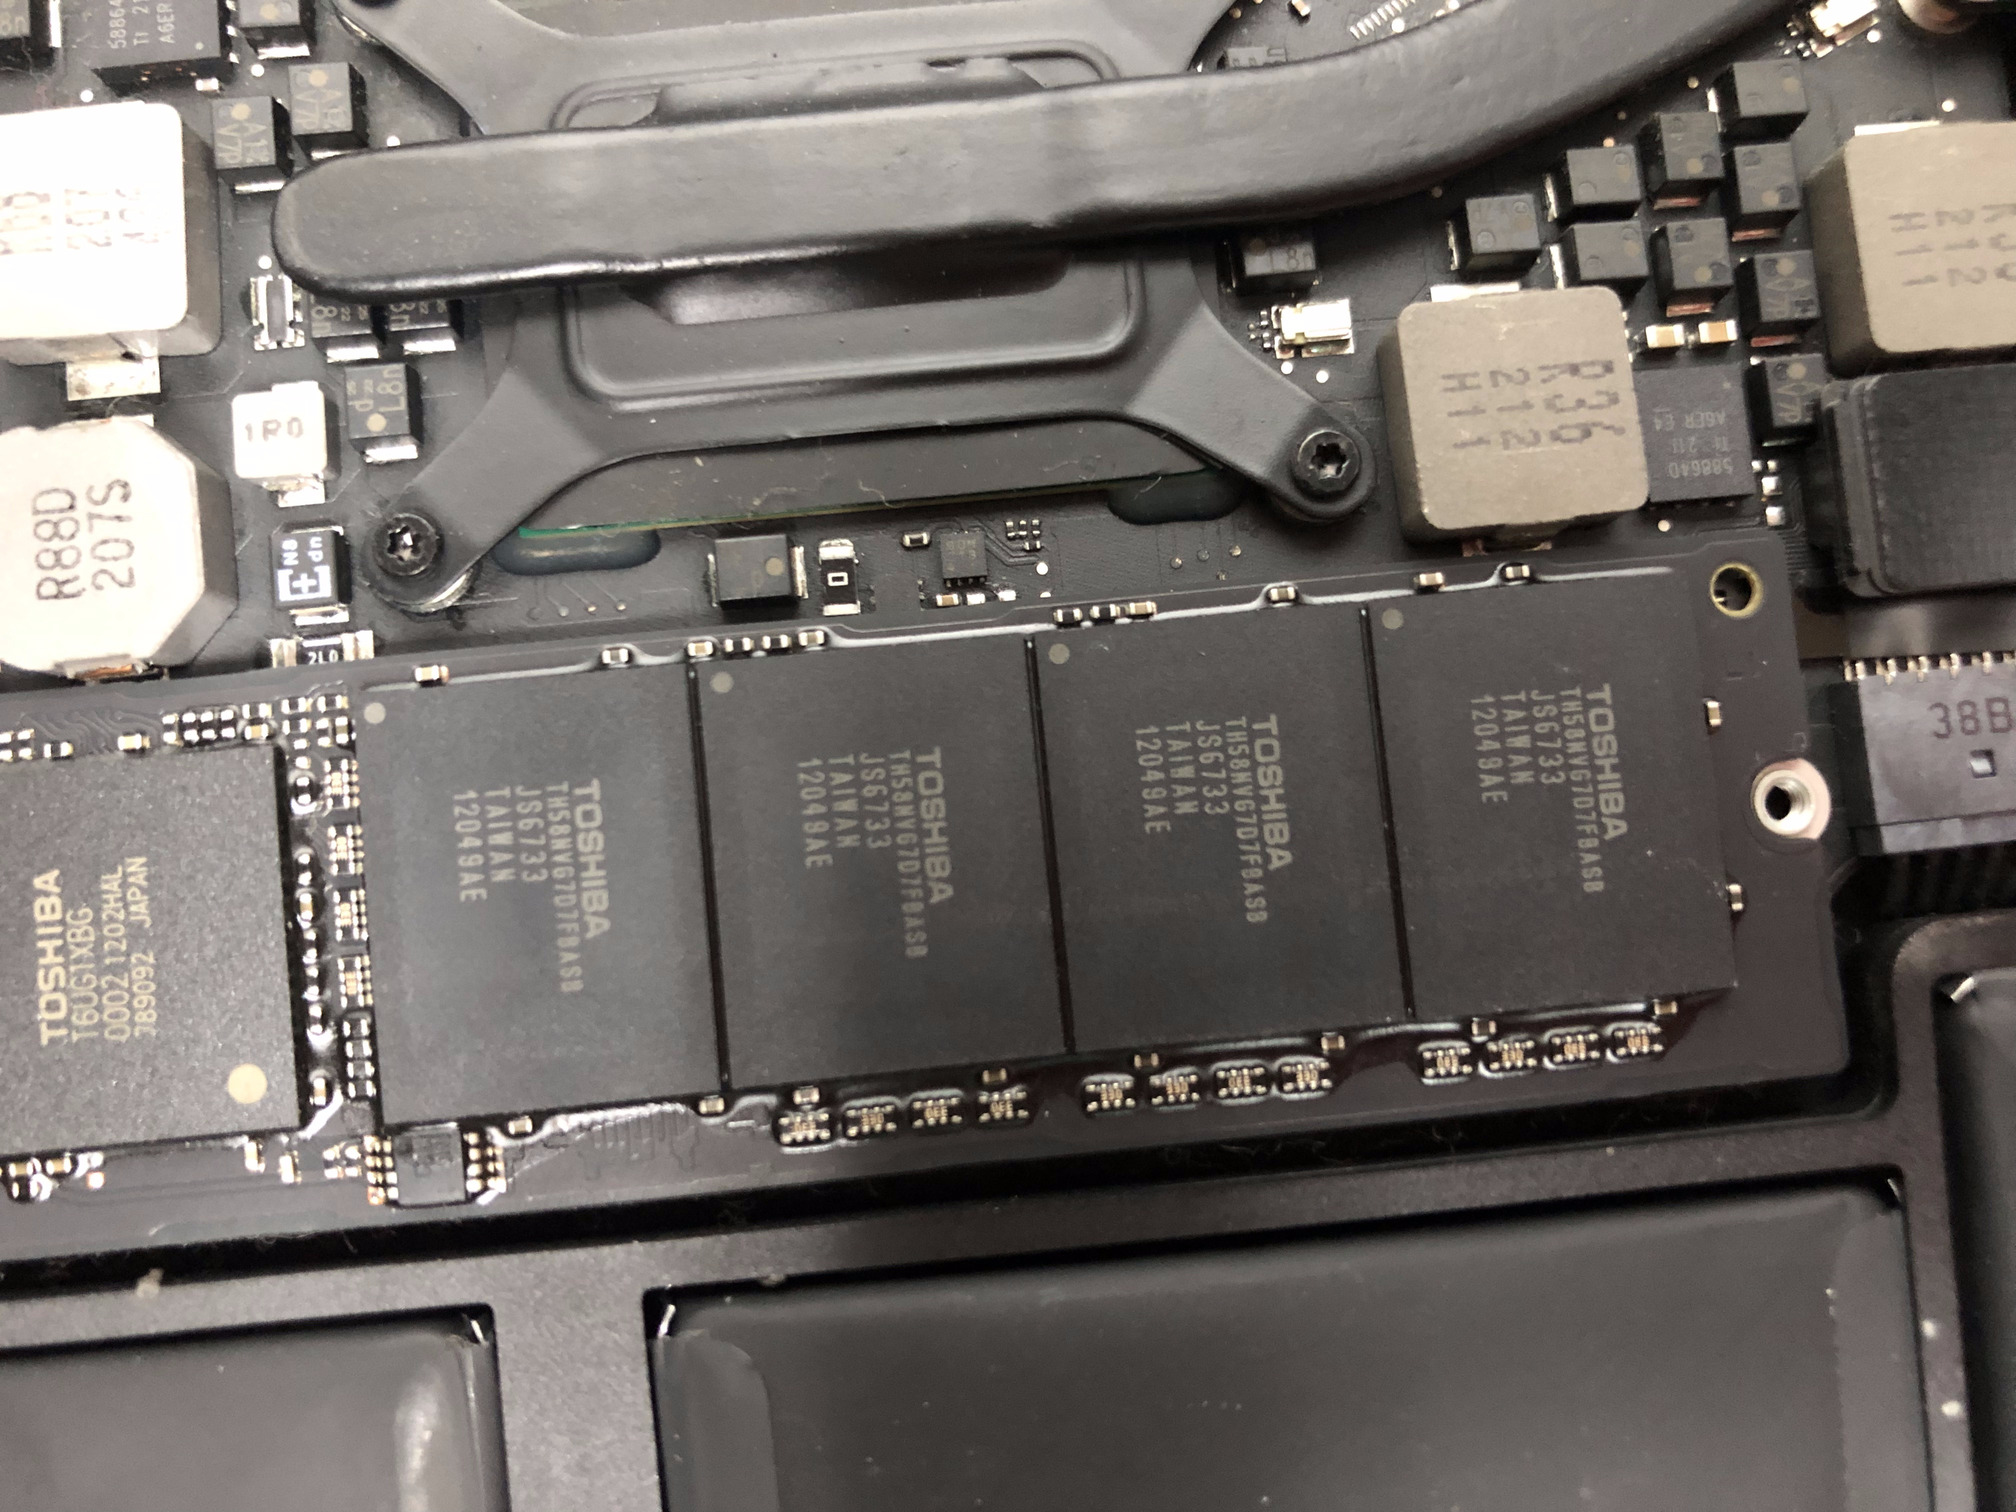 Figure 5a. Remove screw holding SSD in place